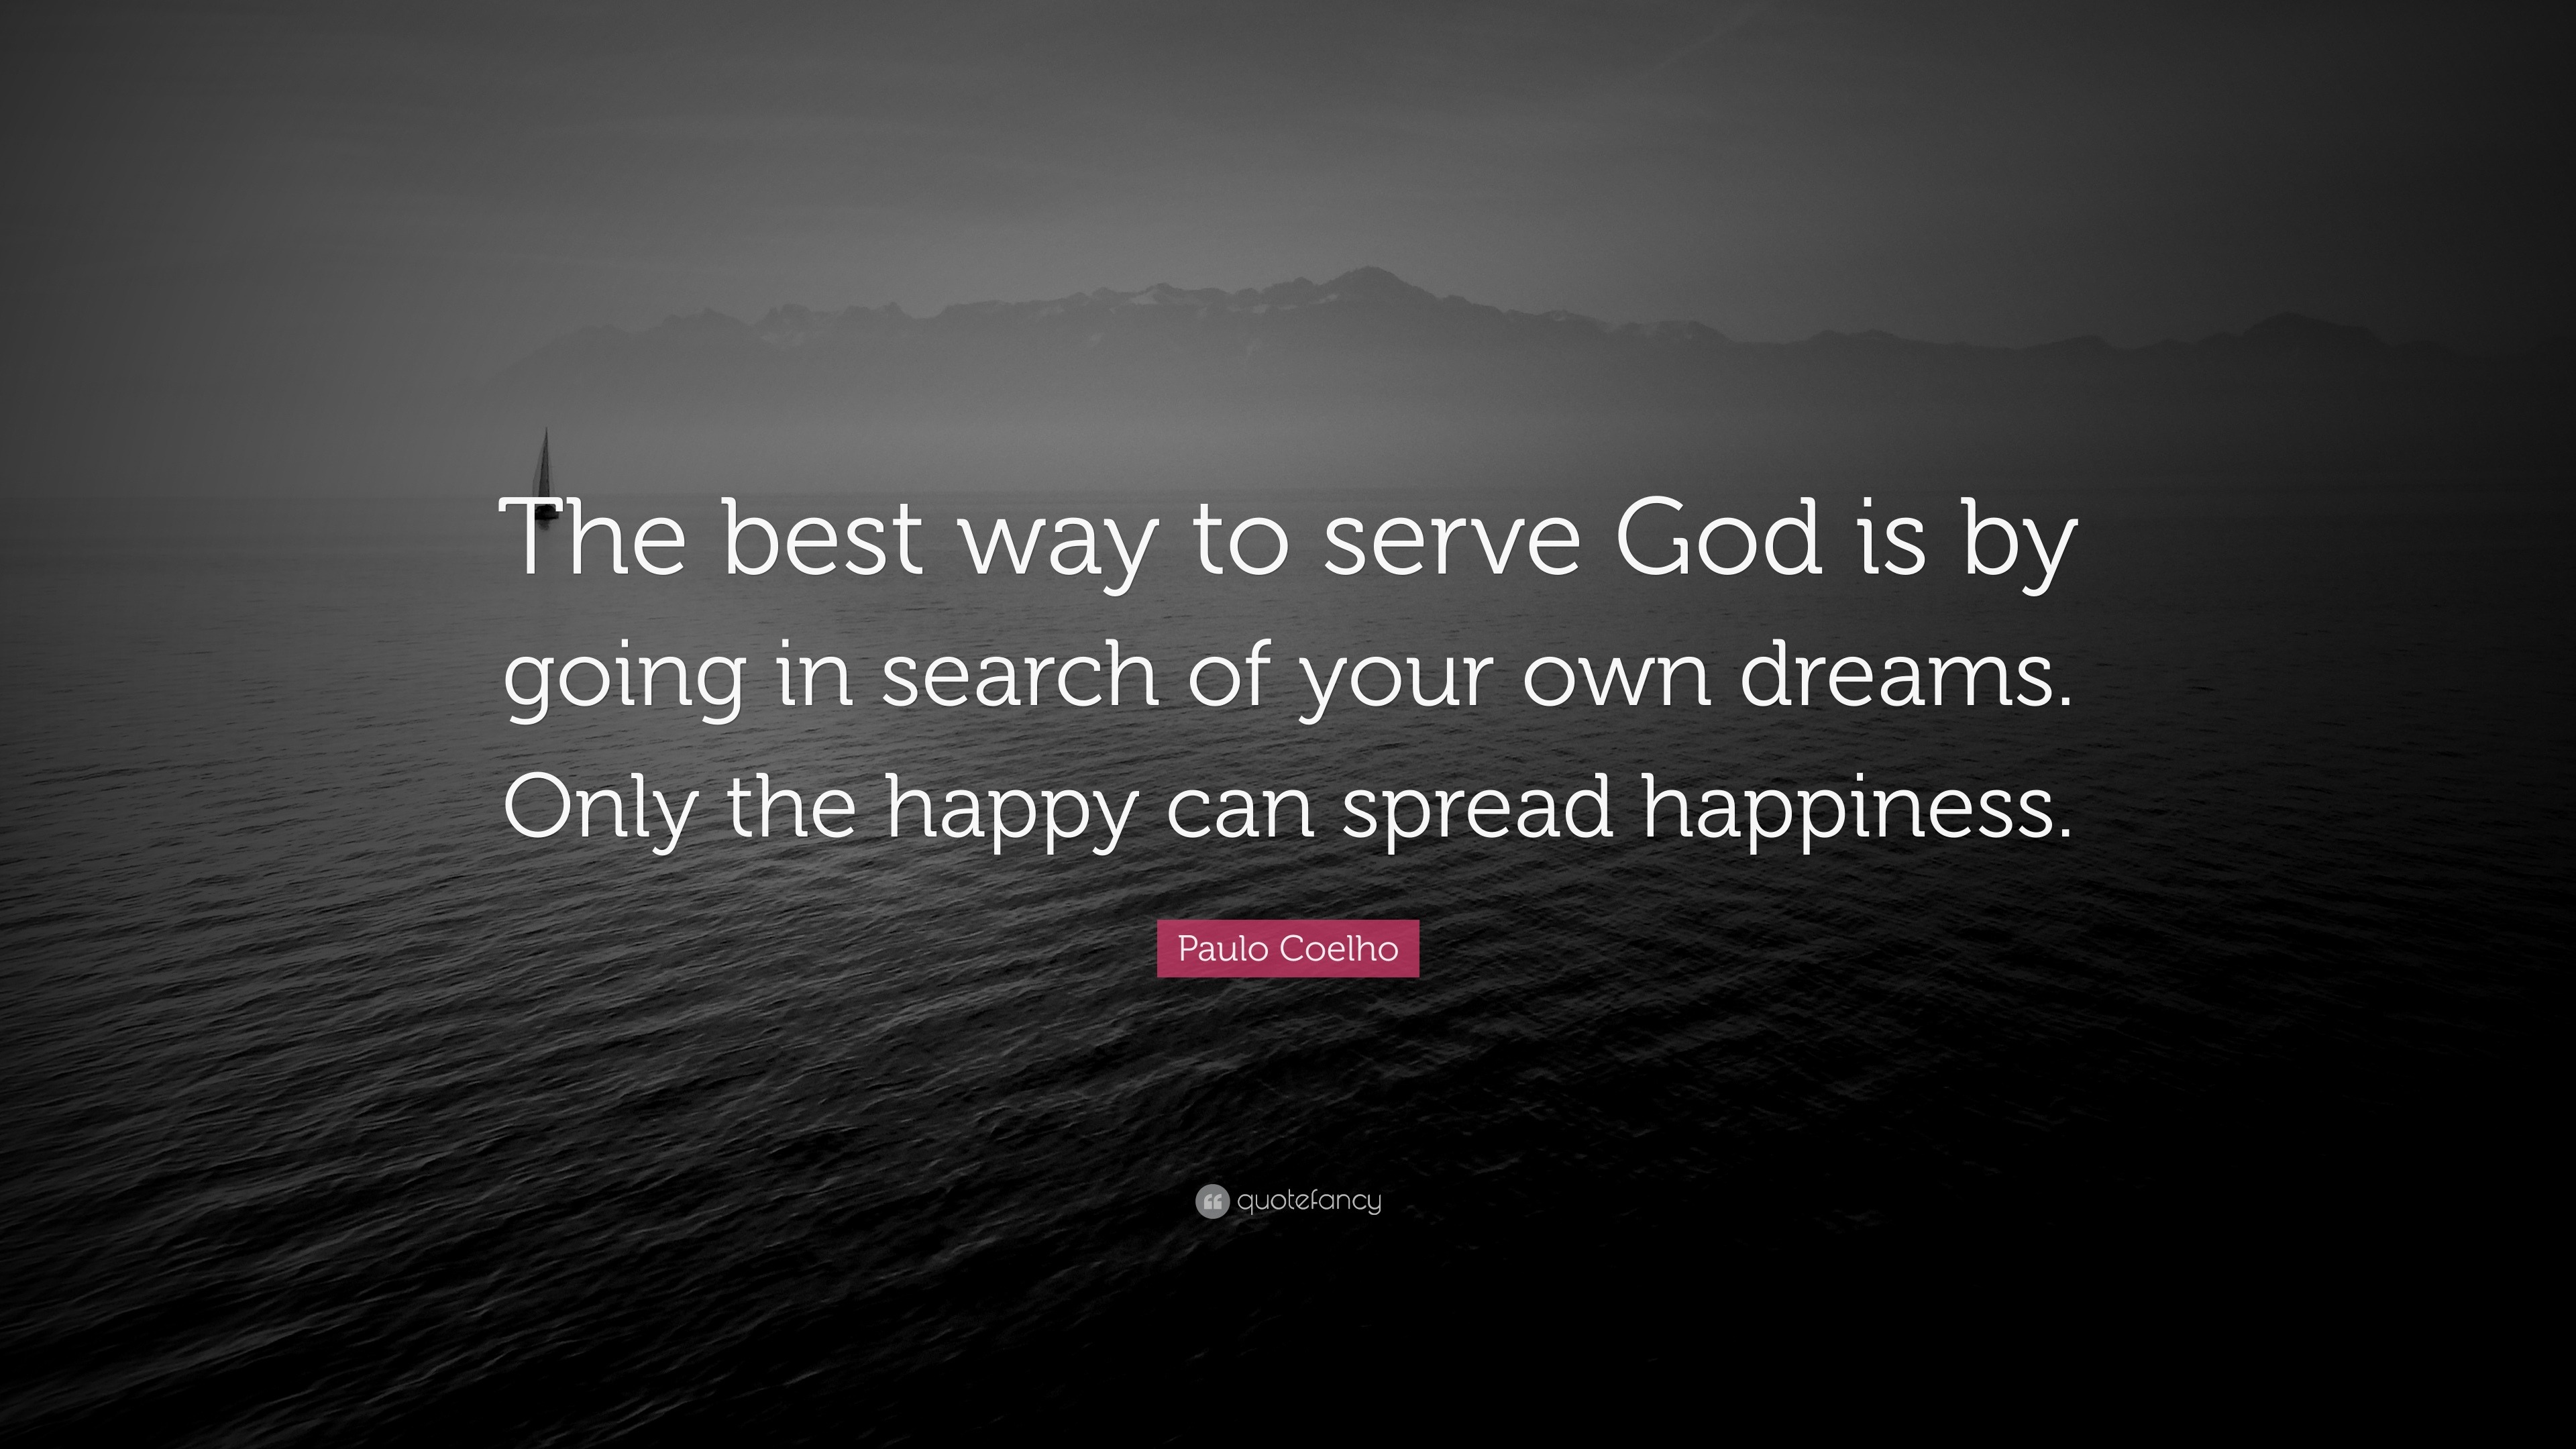 Paulo Coelho Quote The Best Way To Serve God Is By Going In Search Of Your